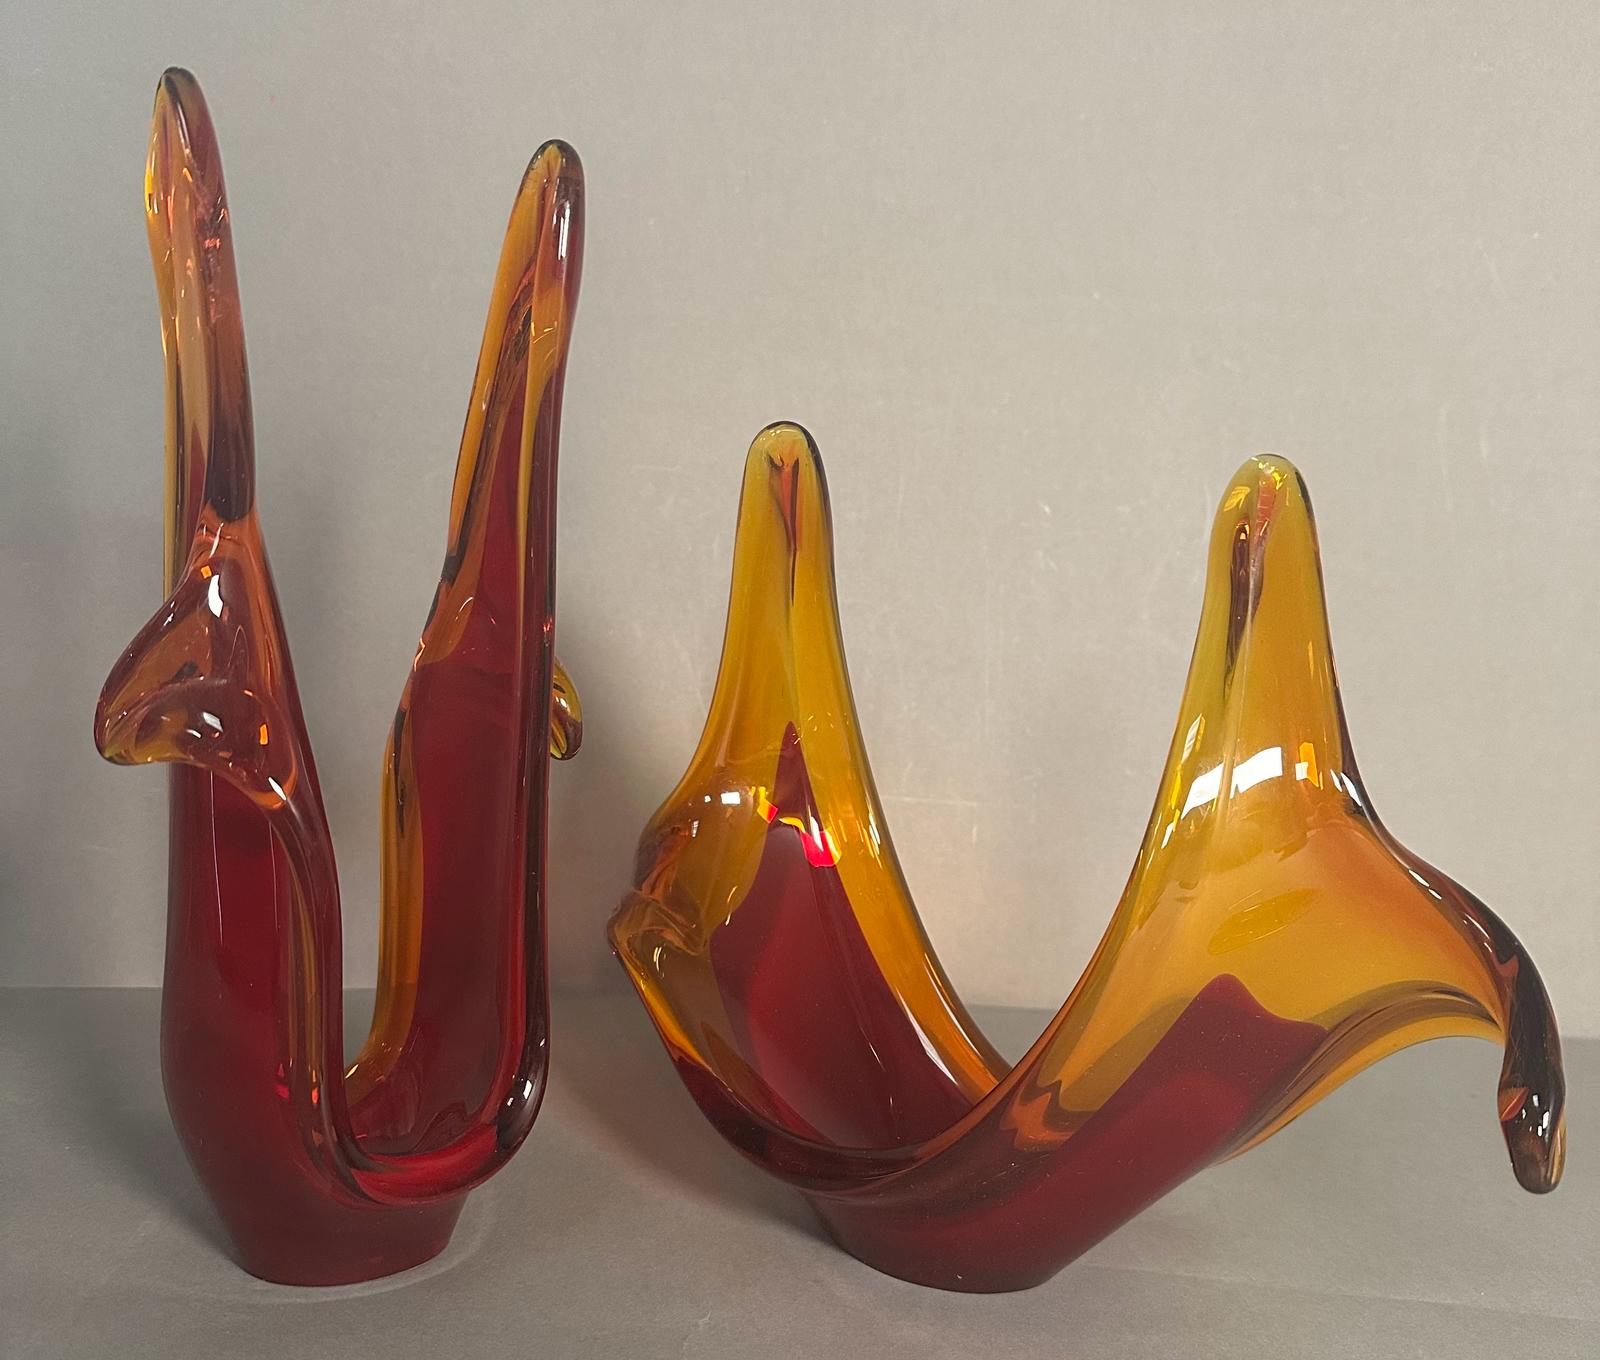 Two contemporary art glass vases in cranberry and yellow